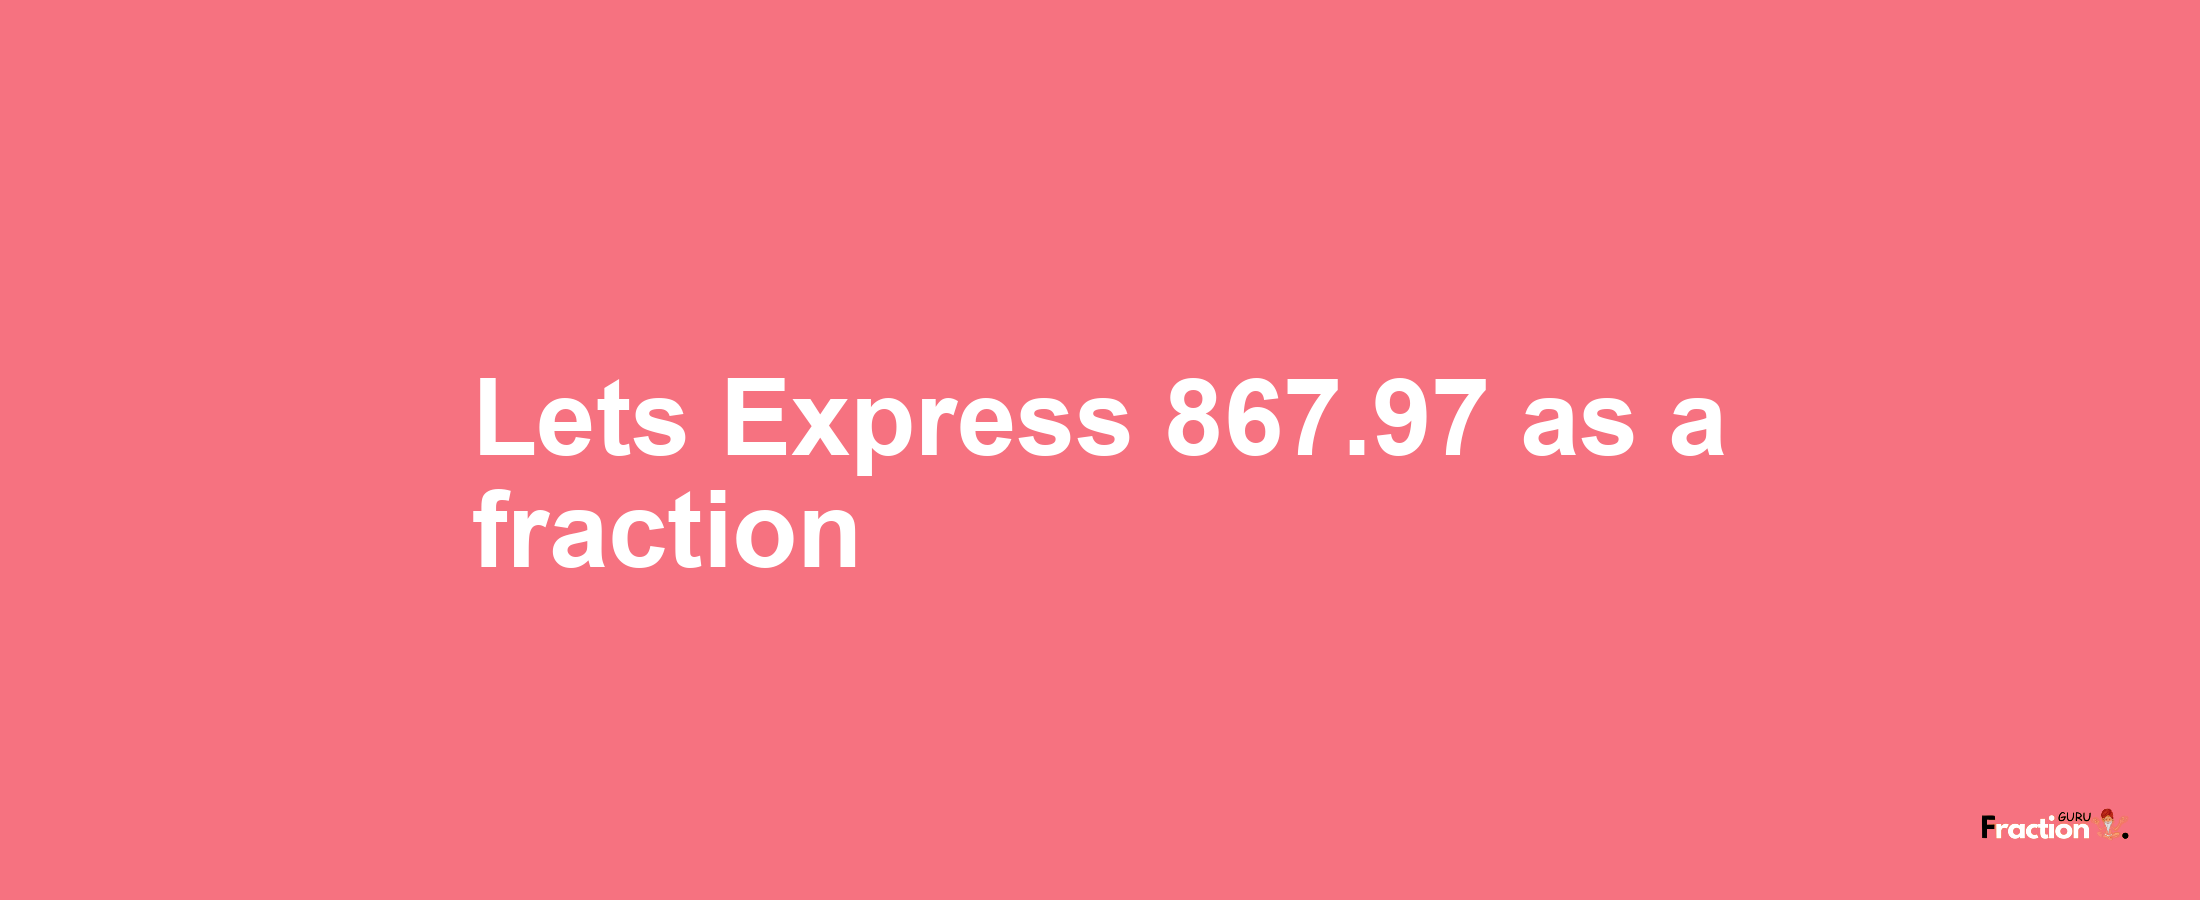 Lets Express 867.97 as afraction